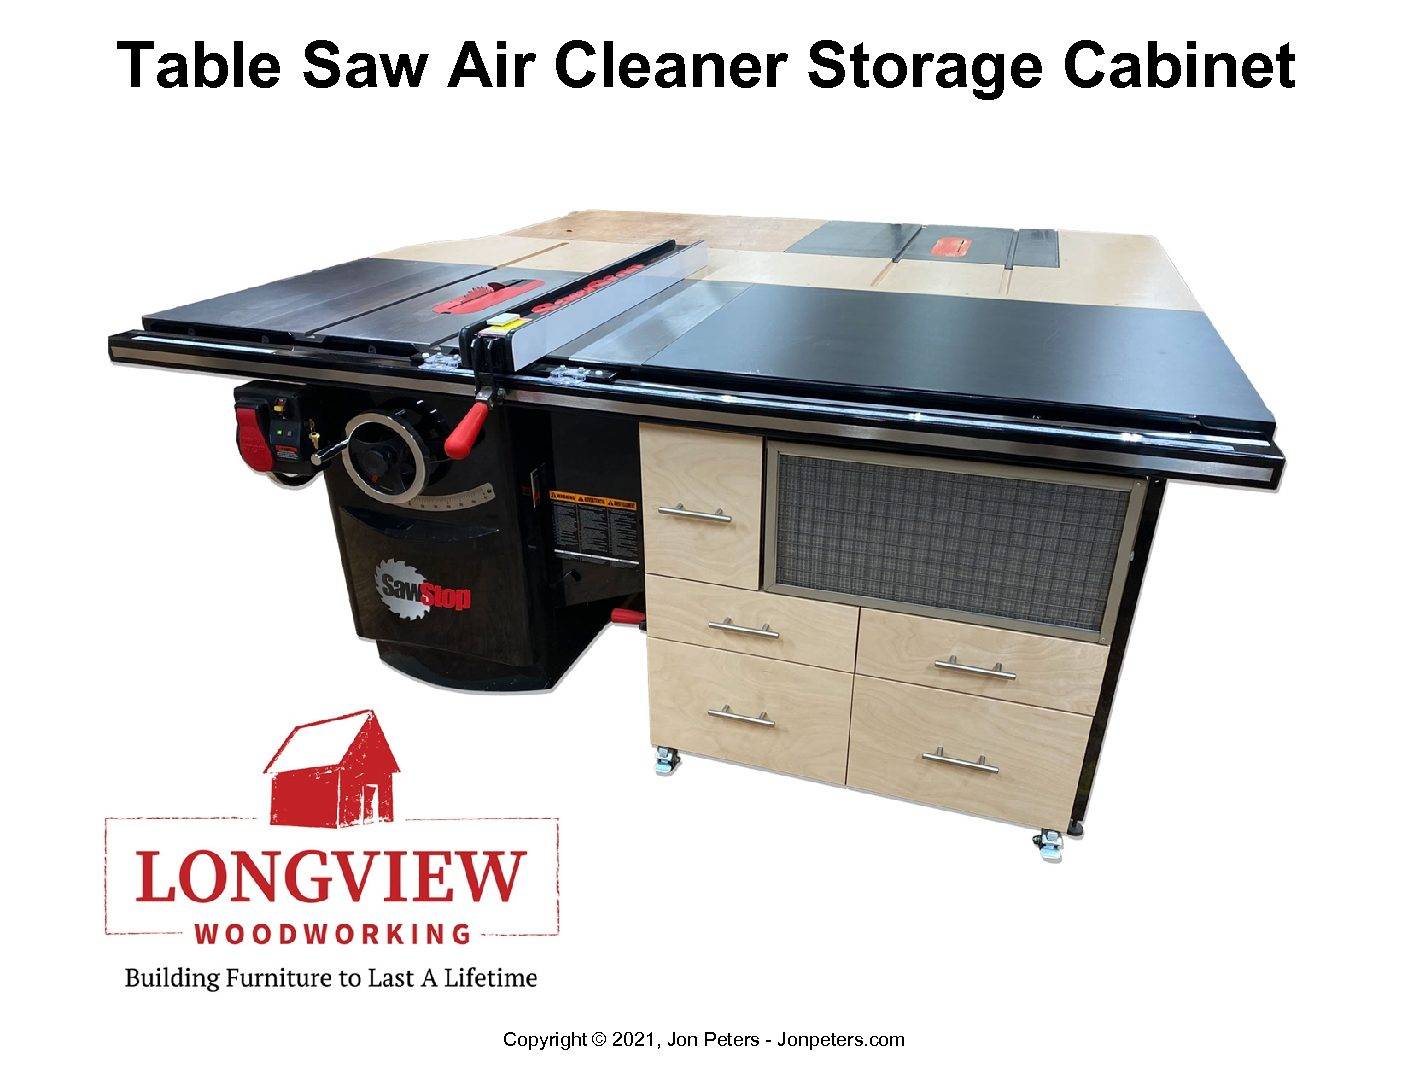 Table Saw Air Cleaner Storage Cabinet Design Plans Jon Peters